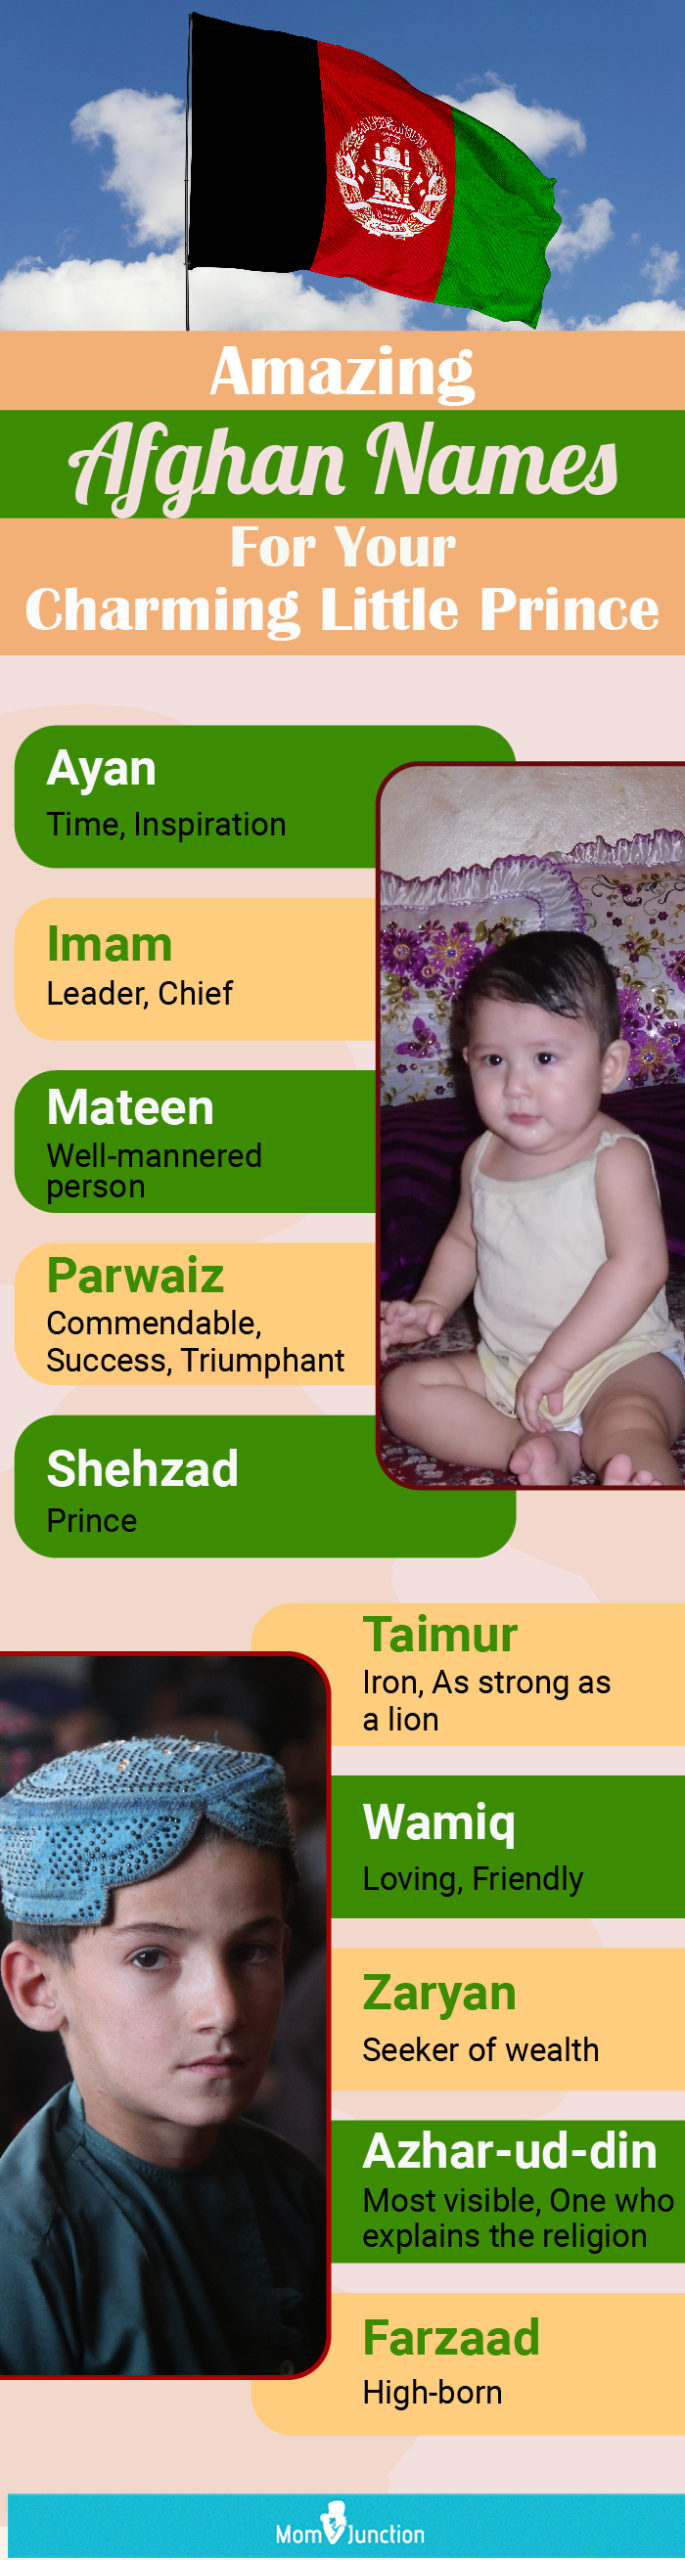 adorable afghan baby boy names with meanings (infographic)